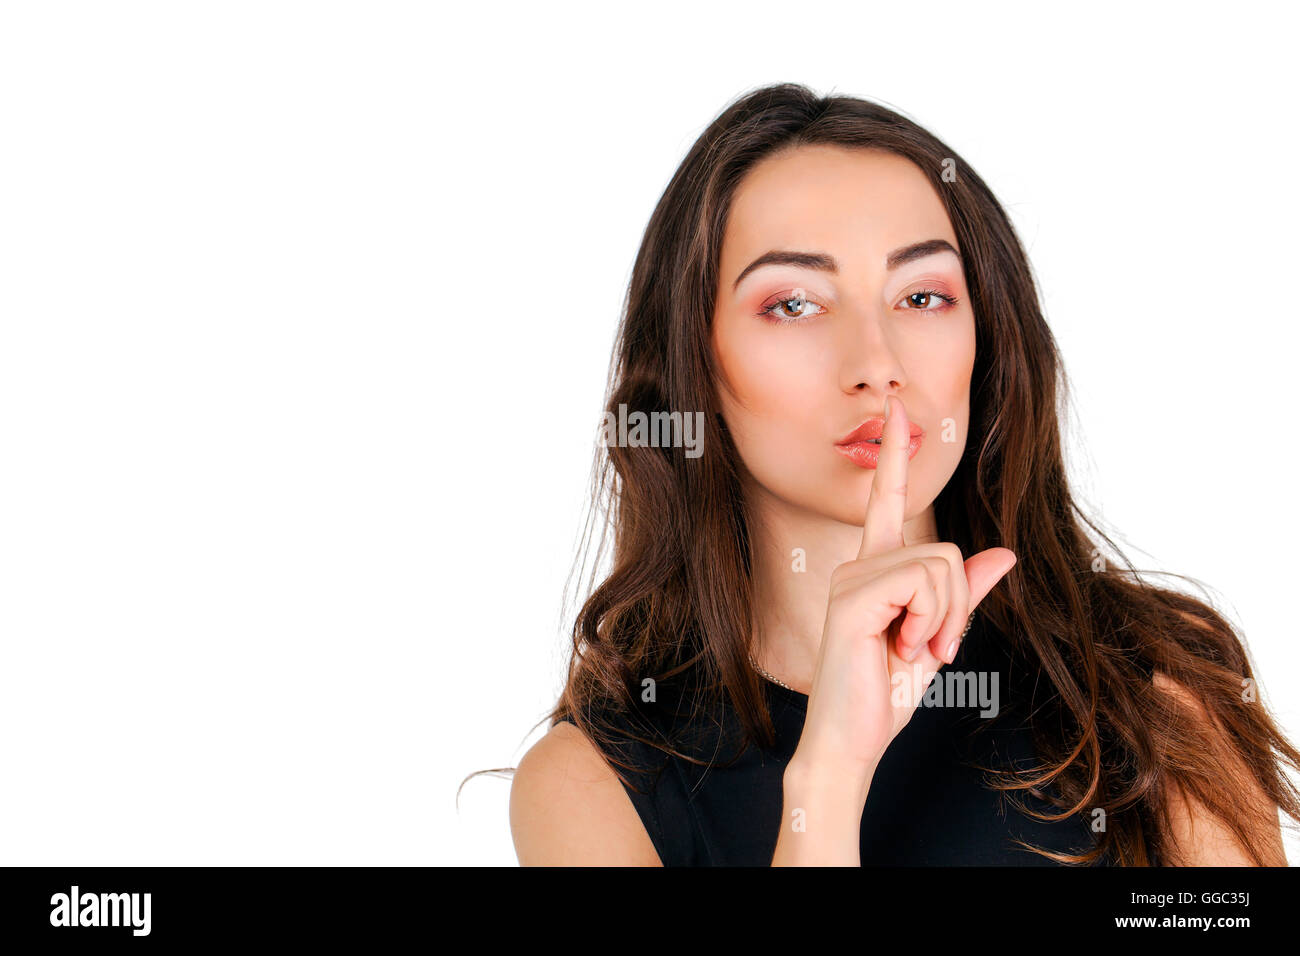 Young Beautiful Brunette Woman Has Put Forefinger To Lips As Sign Of